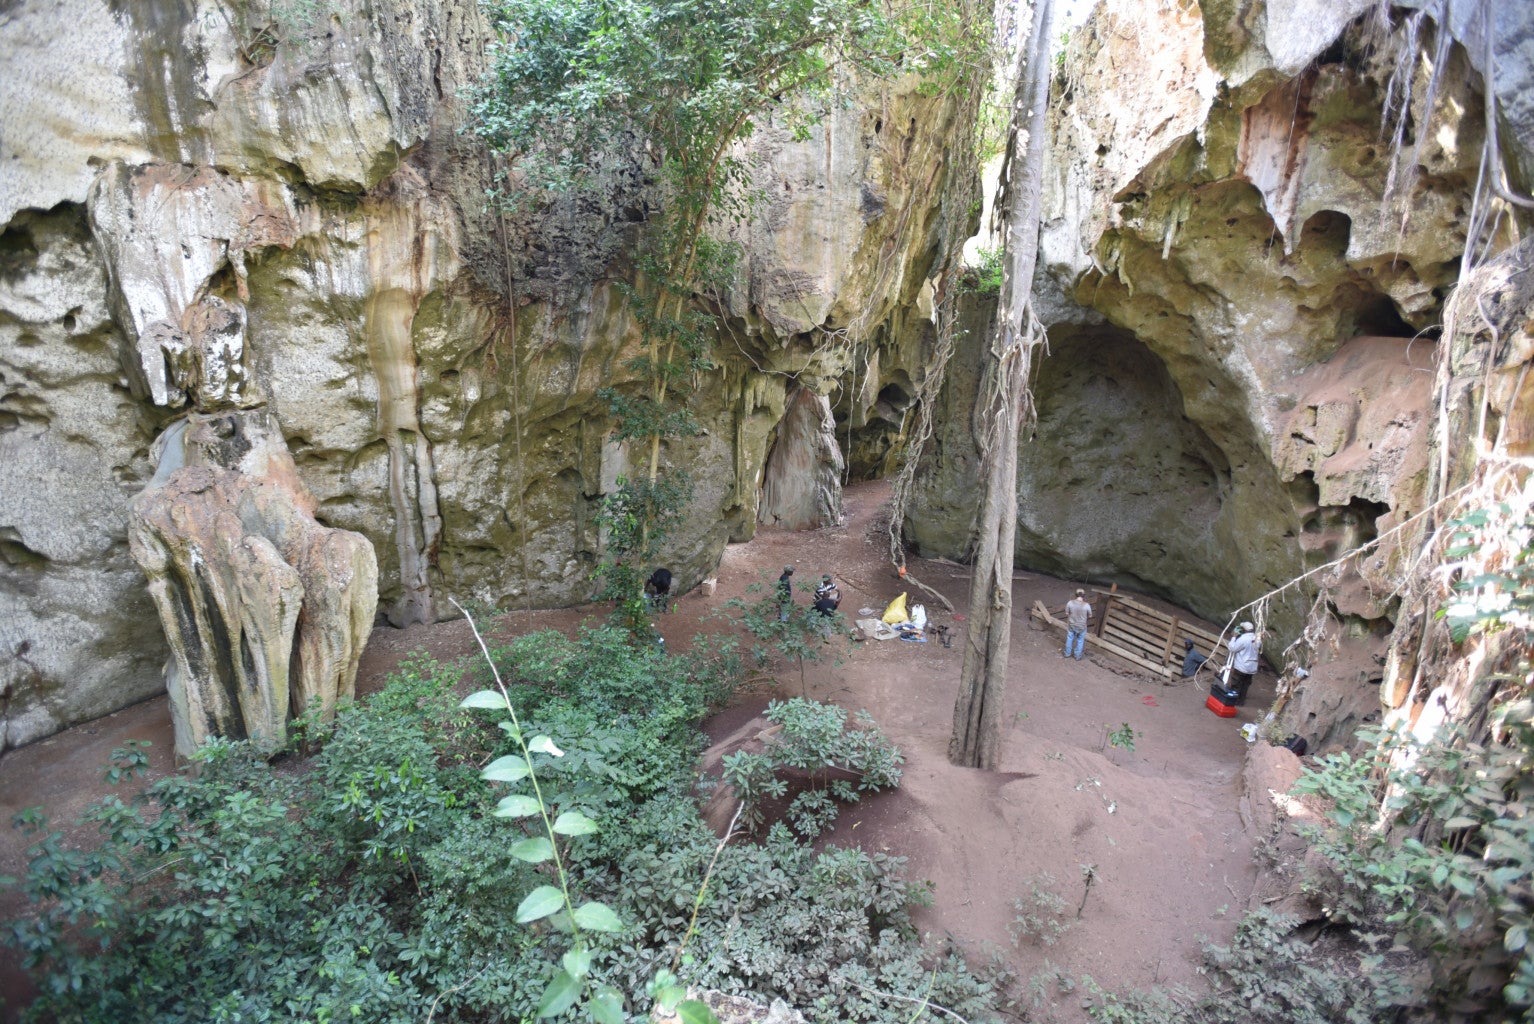 General view of cave site of Panga ya Saidi where burial was unearthed